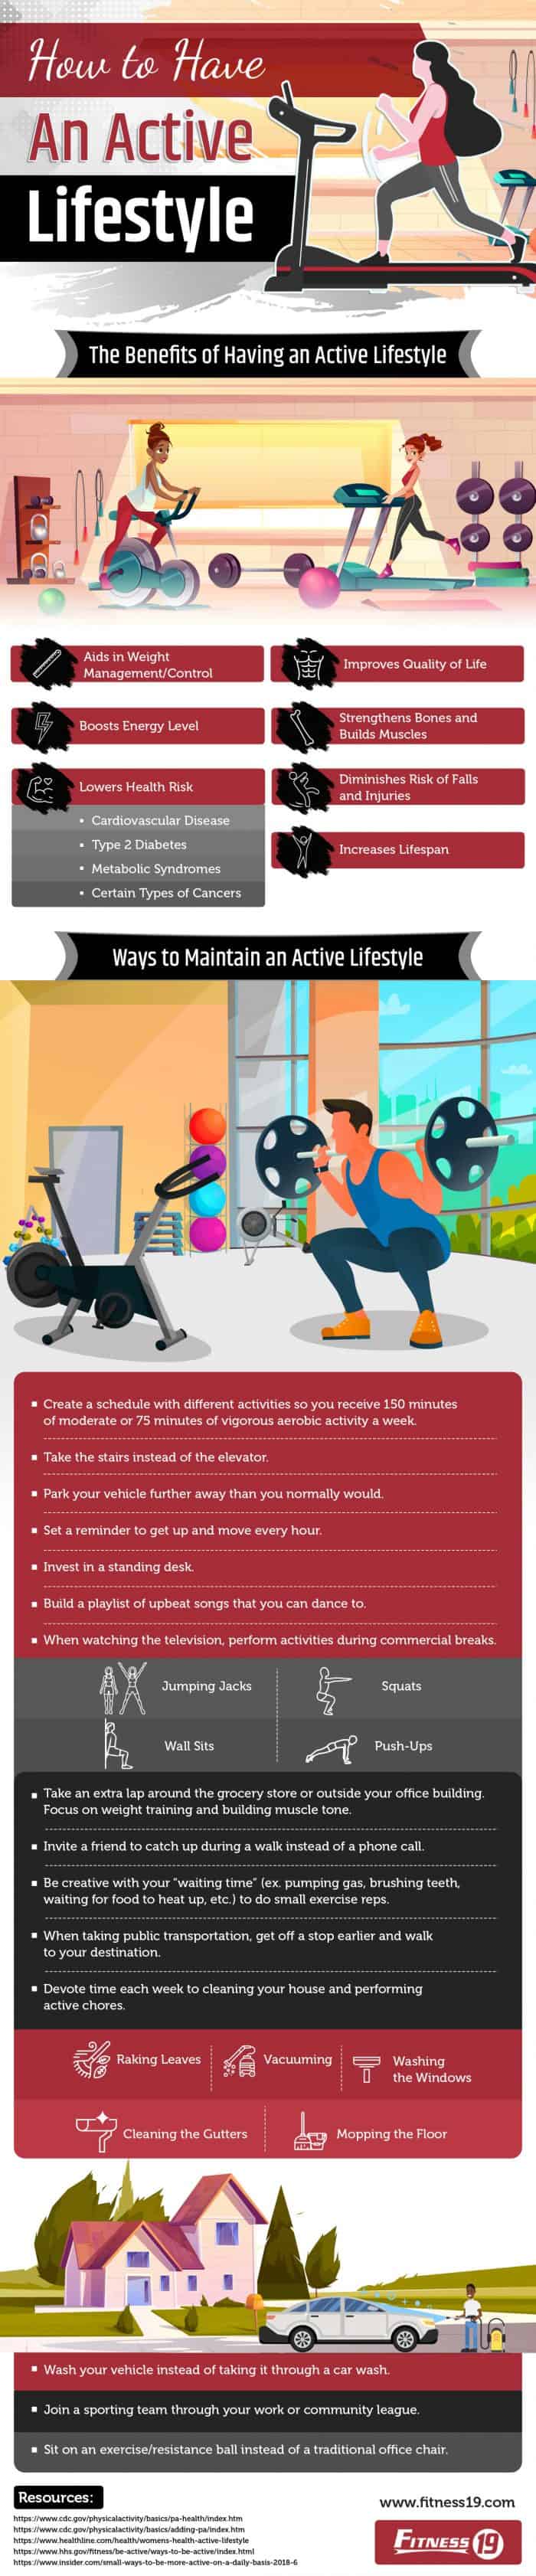 How to achieve an active lifestyle